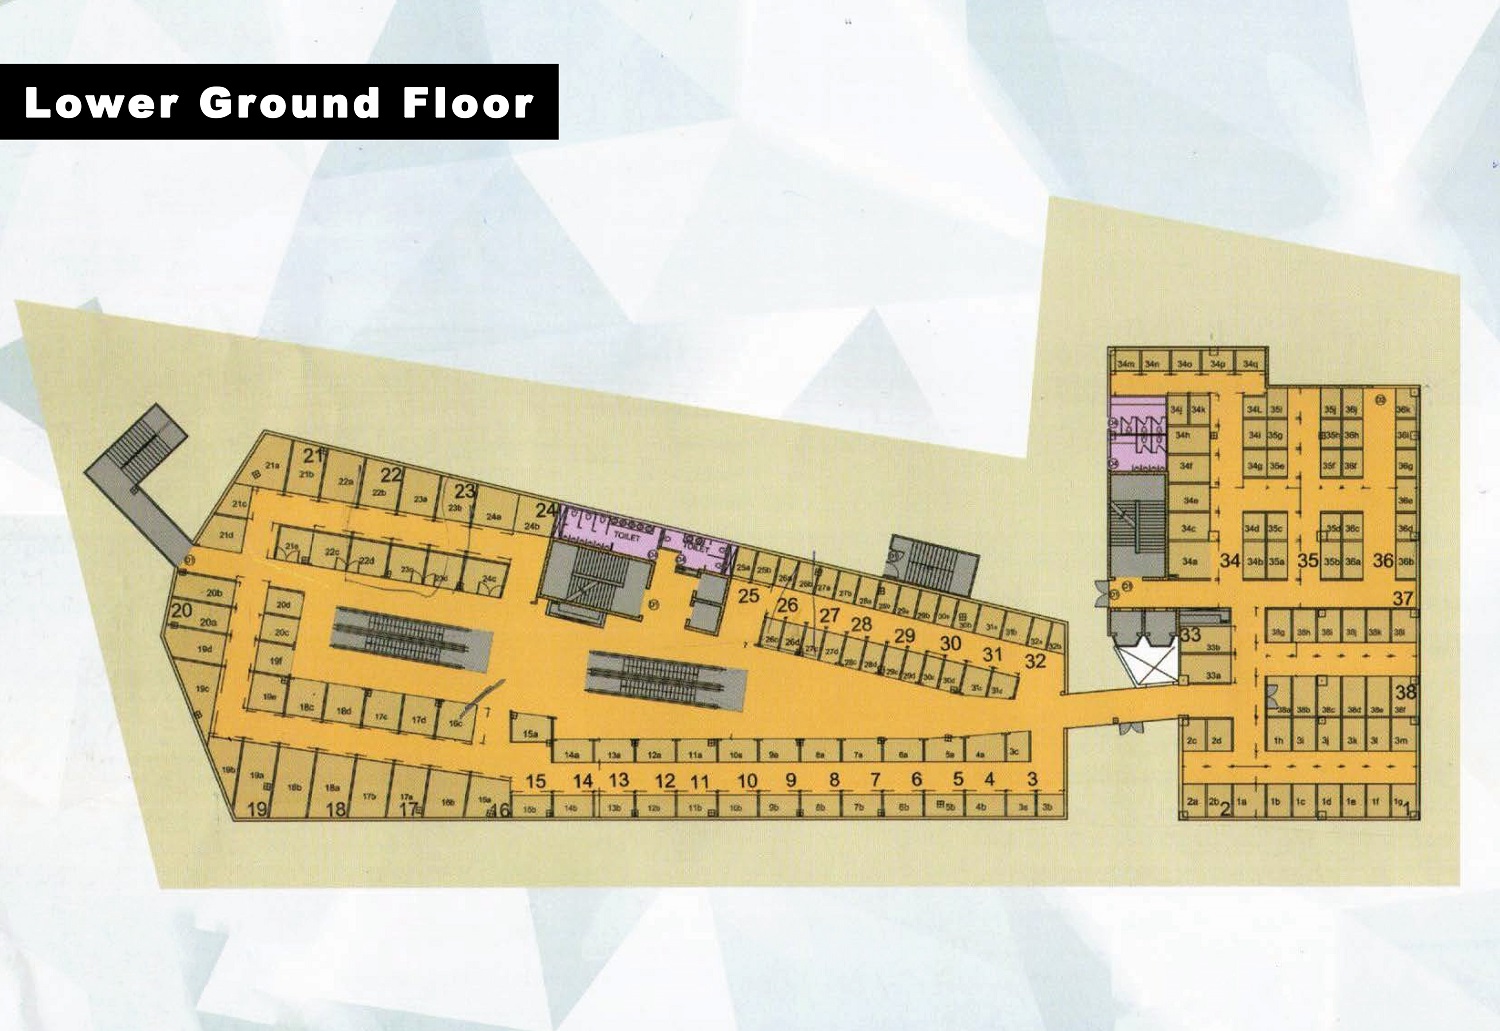 Lower Ground Floor - The Core Mall